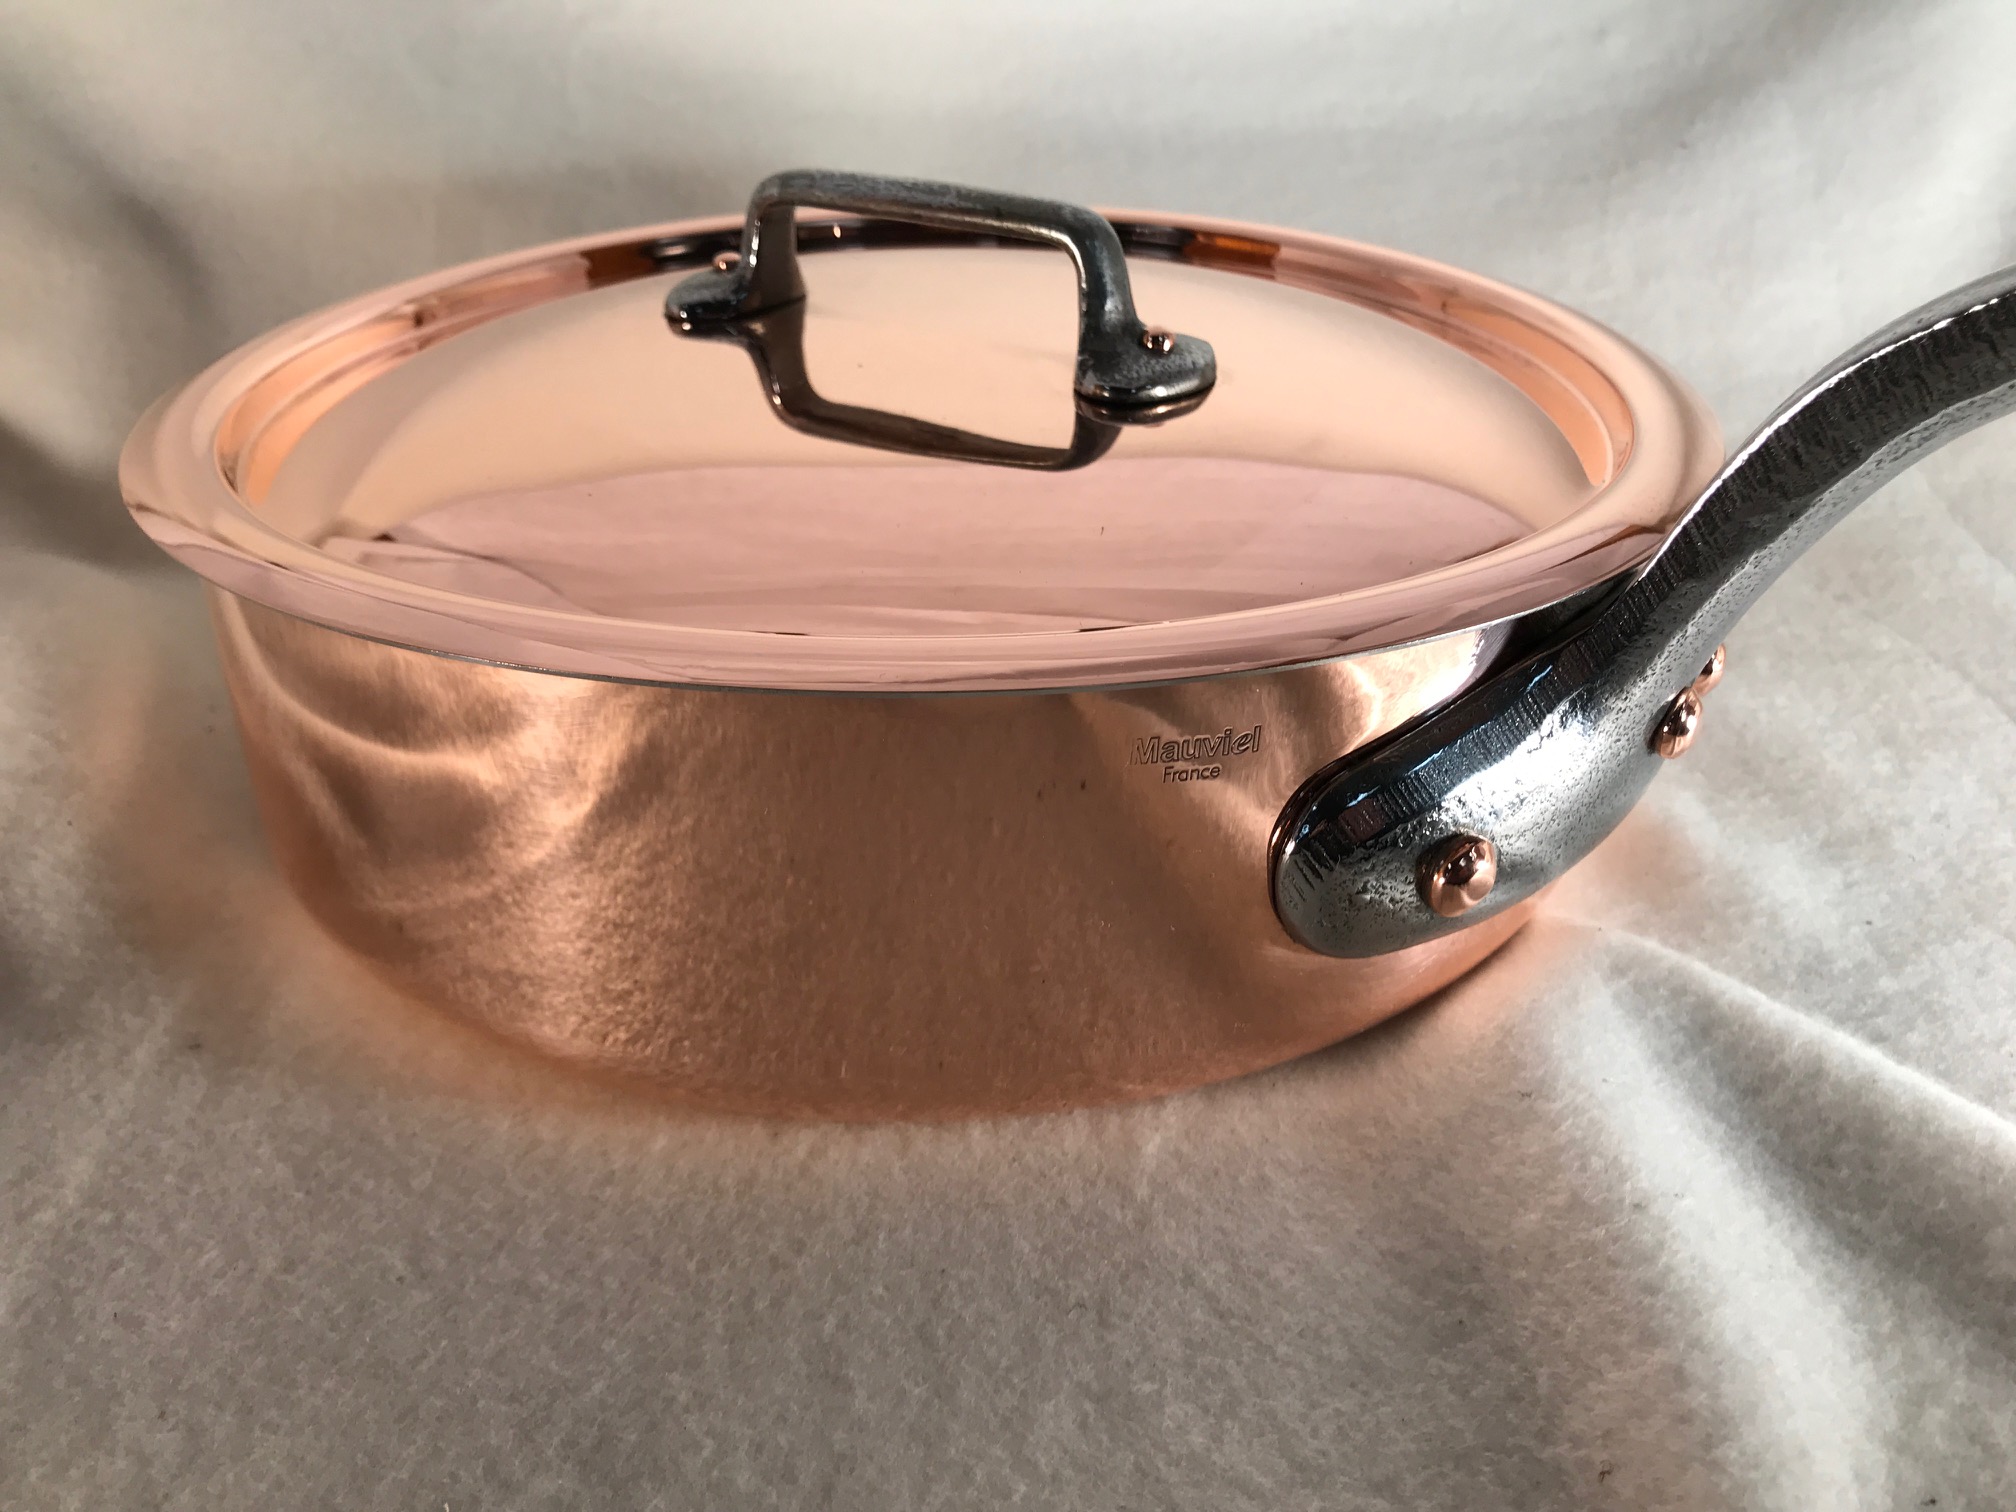 Mirror Polished Copper Band Saute Pan with Lid 9.5 inch Nickel Free Non-Stick